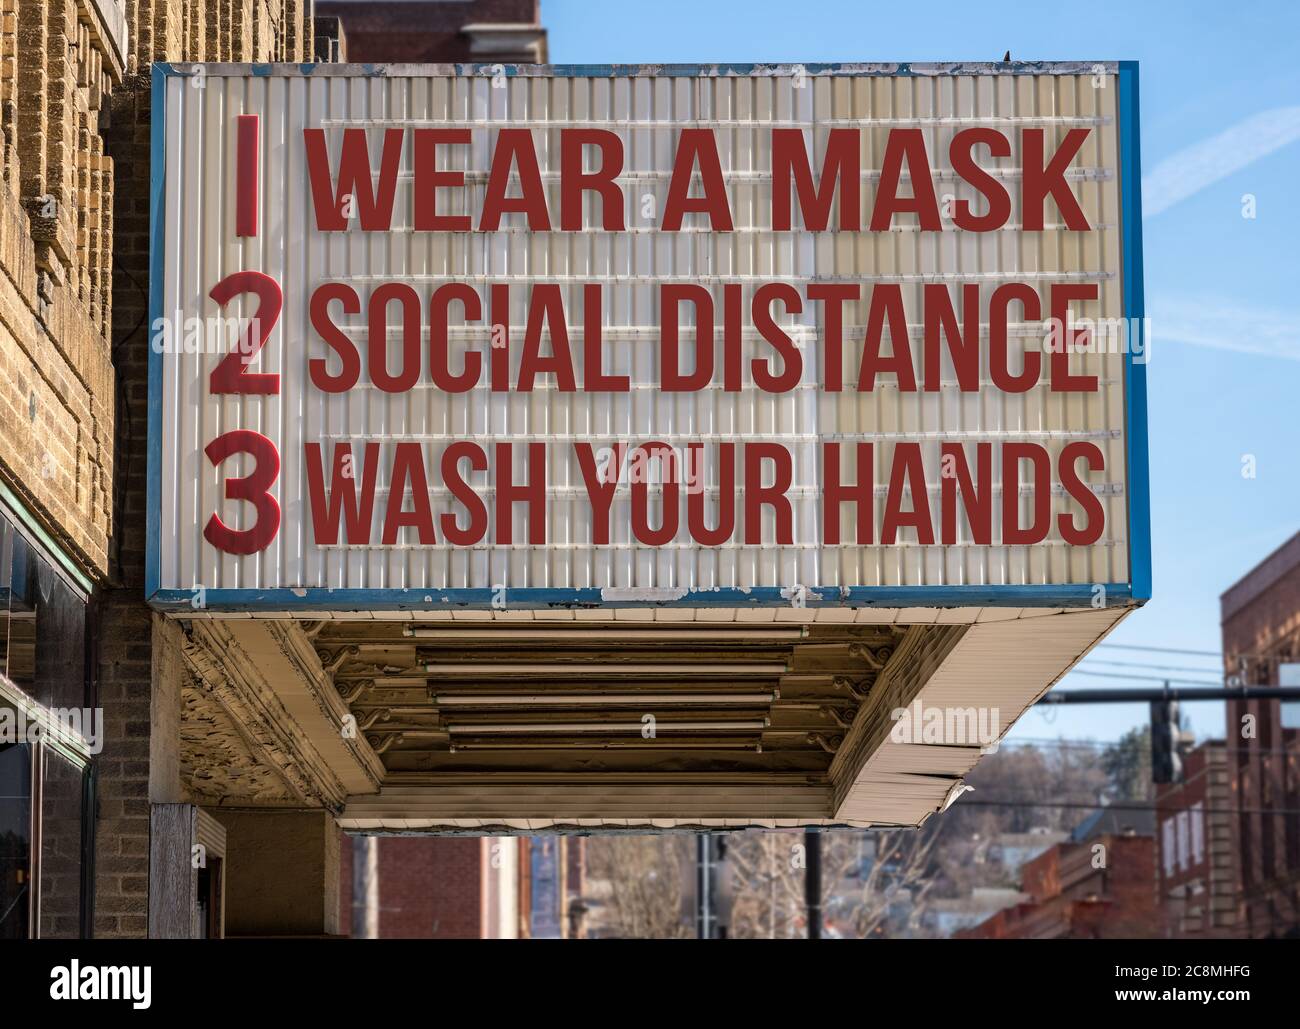 Mockup of movie cinema billboard with wear a mask, social distance and wash hands to deal with the coronavirus epidemic. Stock Photo